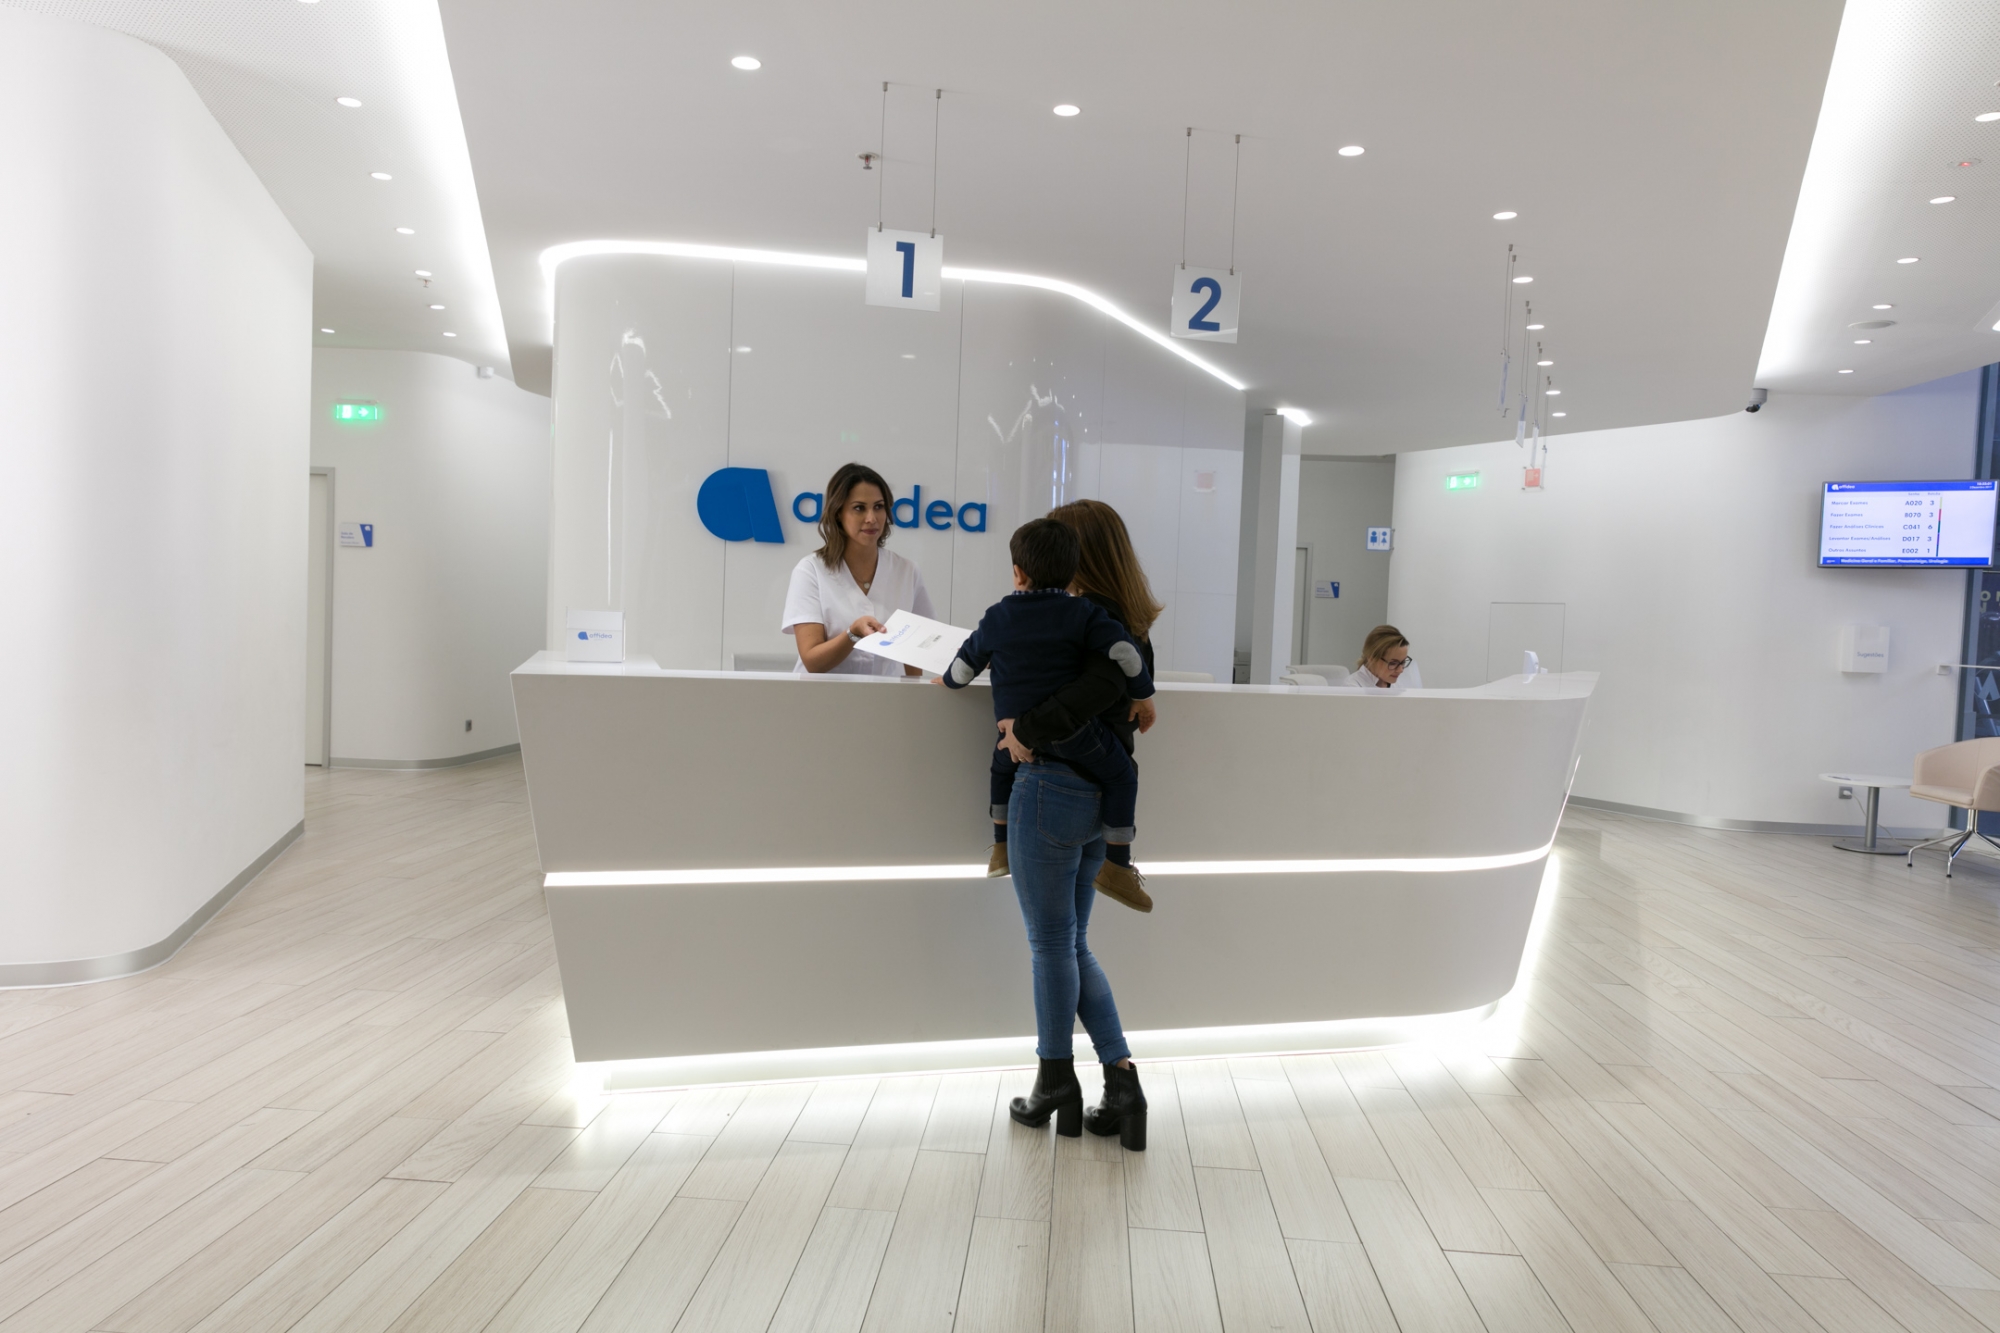 Affidea: Nothing is more important than health